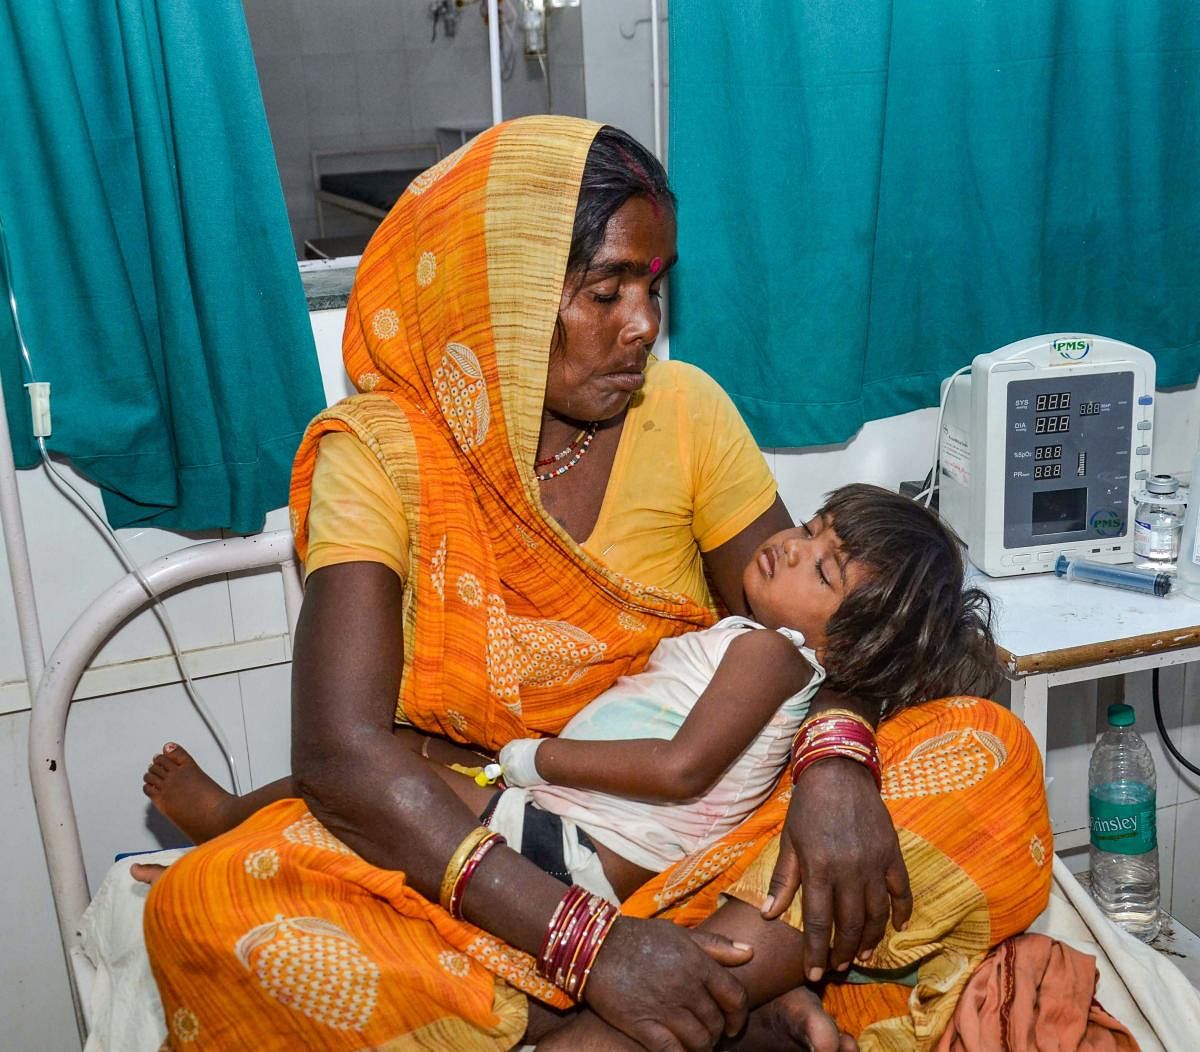 A child showing symptoms of Acute Encephalitis Syndrome (AES) being treated at a hospital in Muzaffarpur, on June 21, 2019. PTI